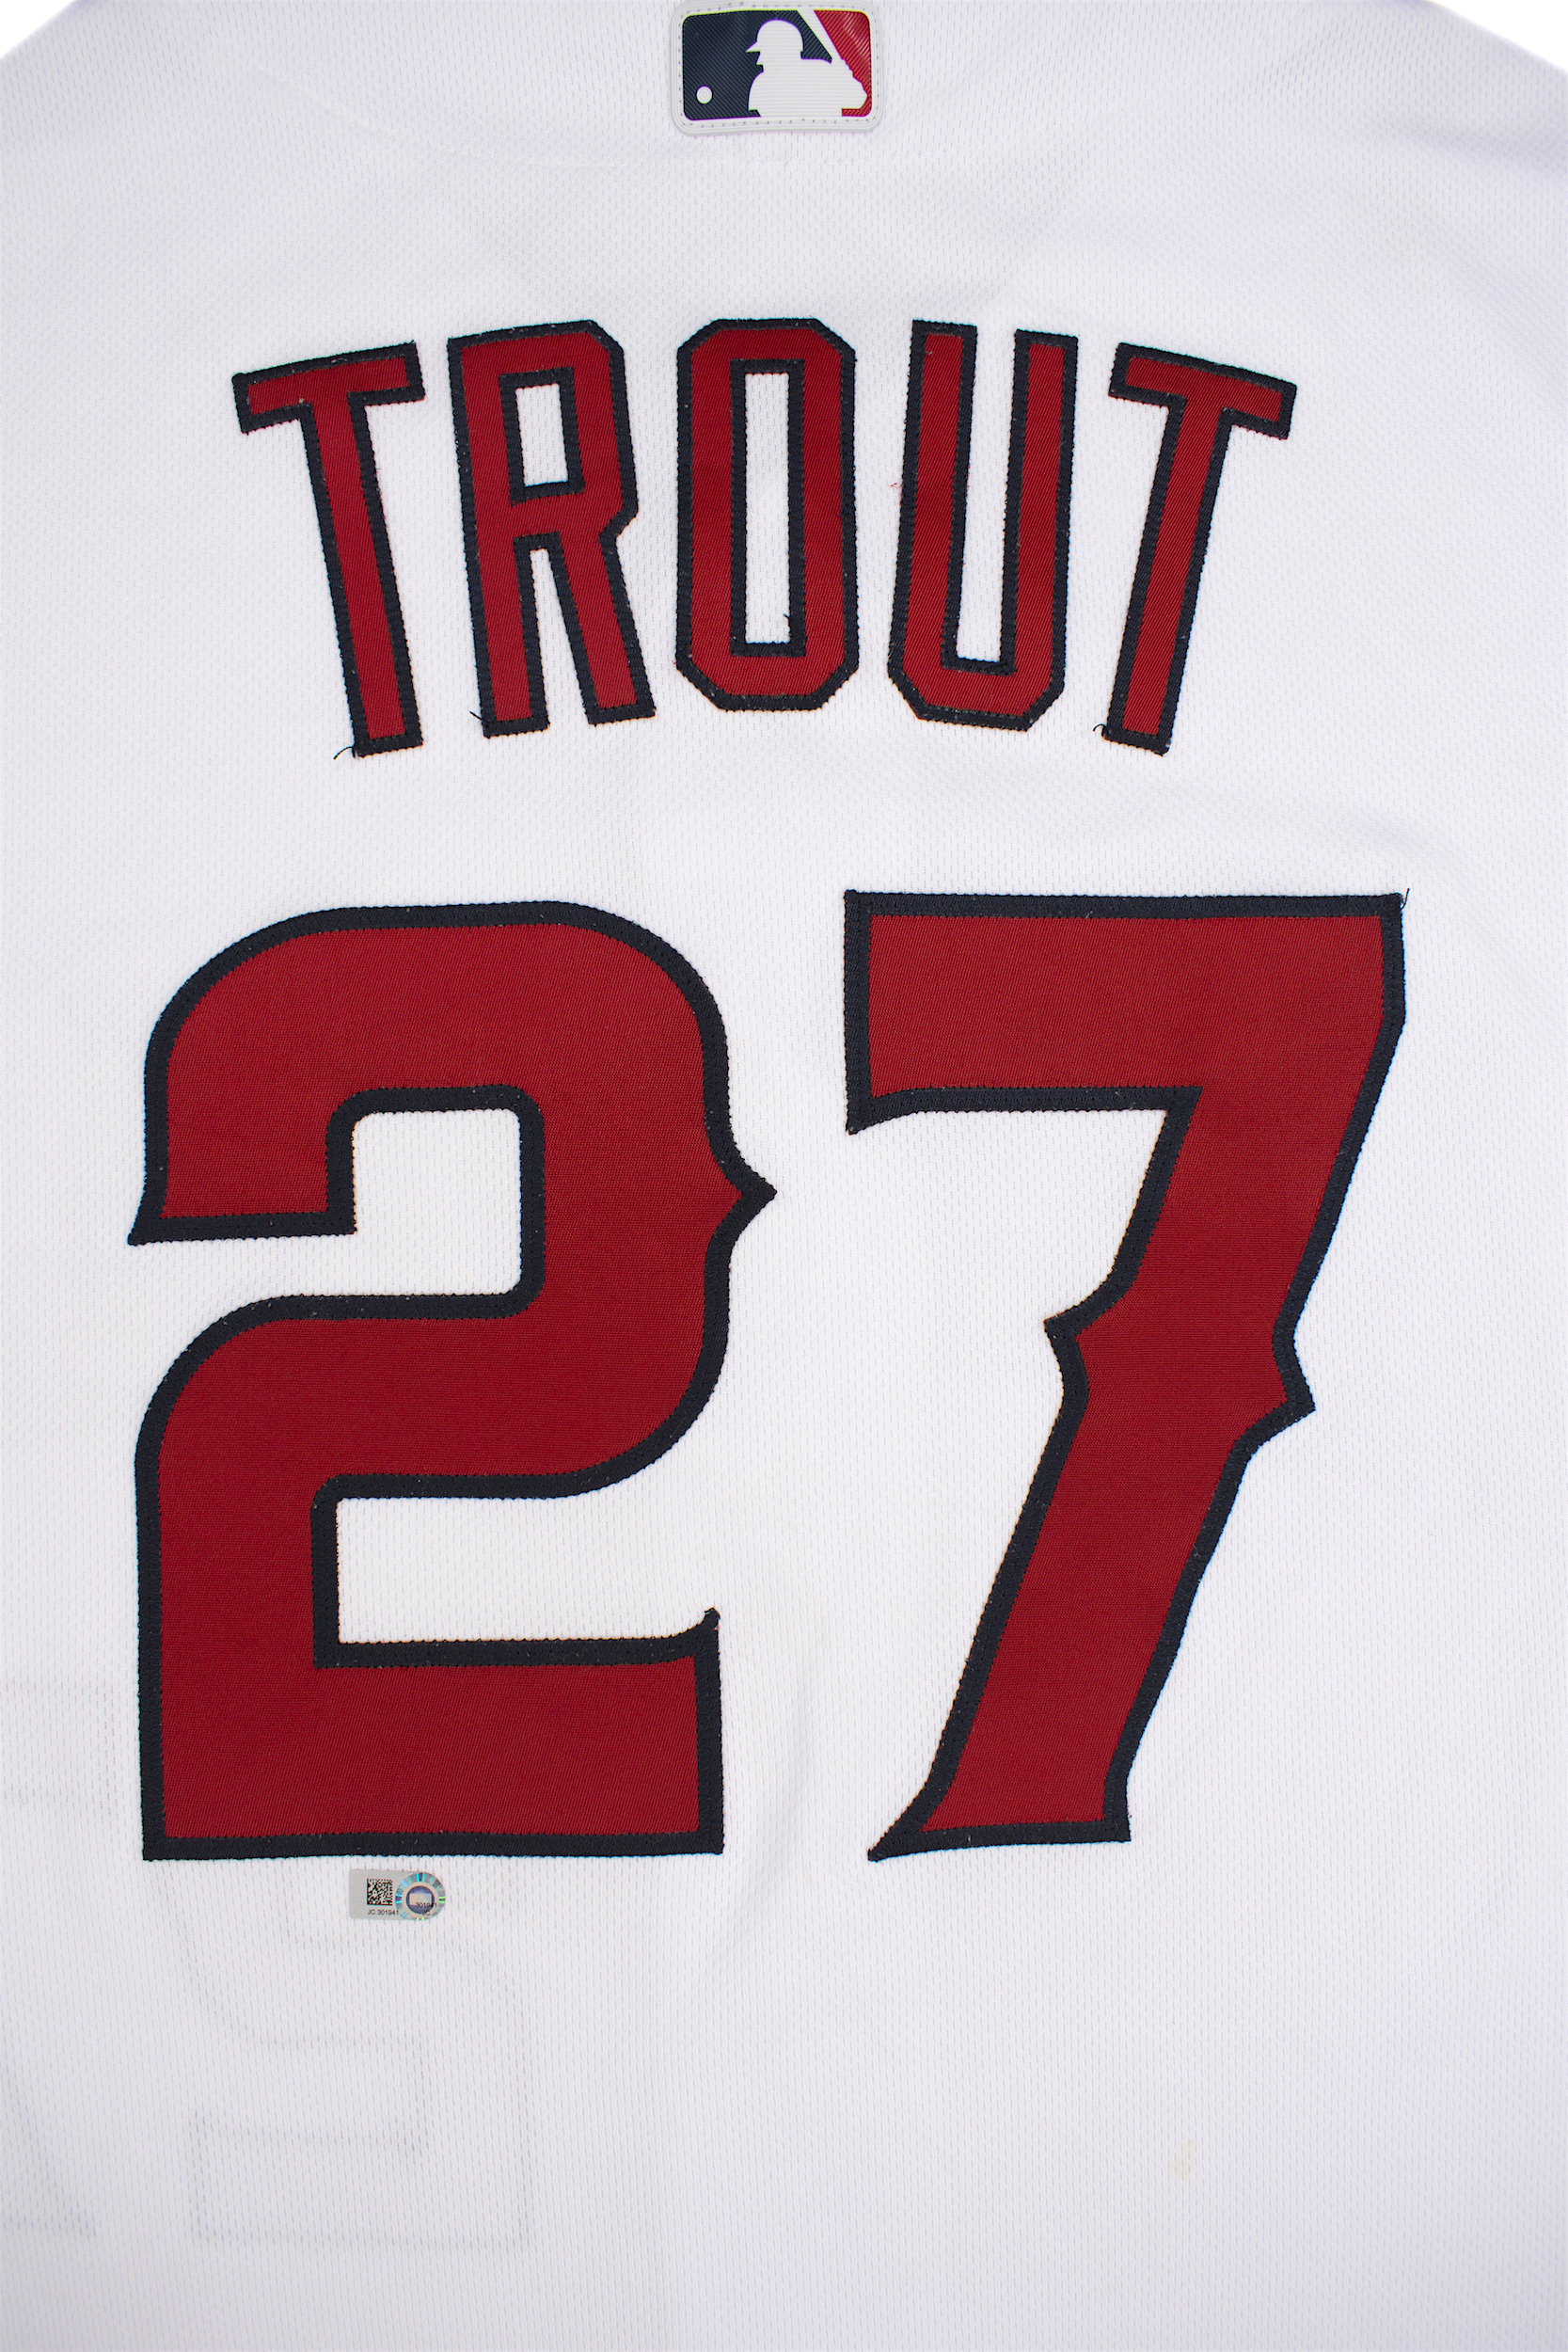 Mike Trout Game Used Jersey: 2 Home Runs